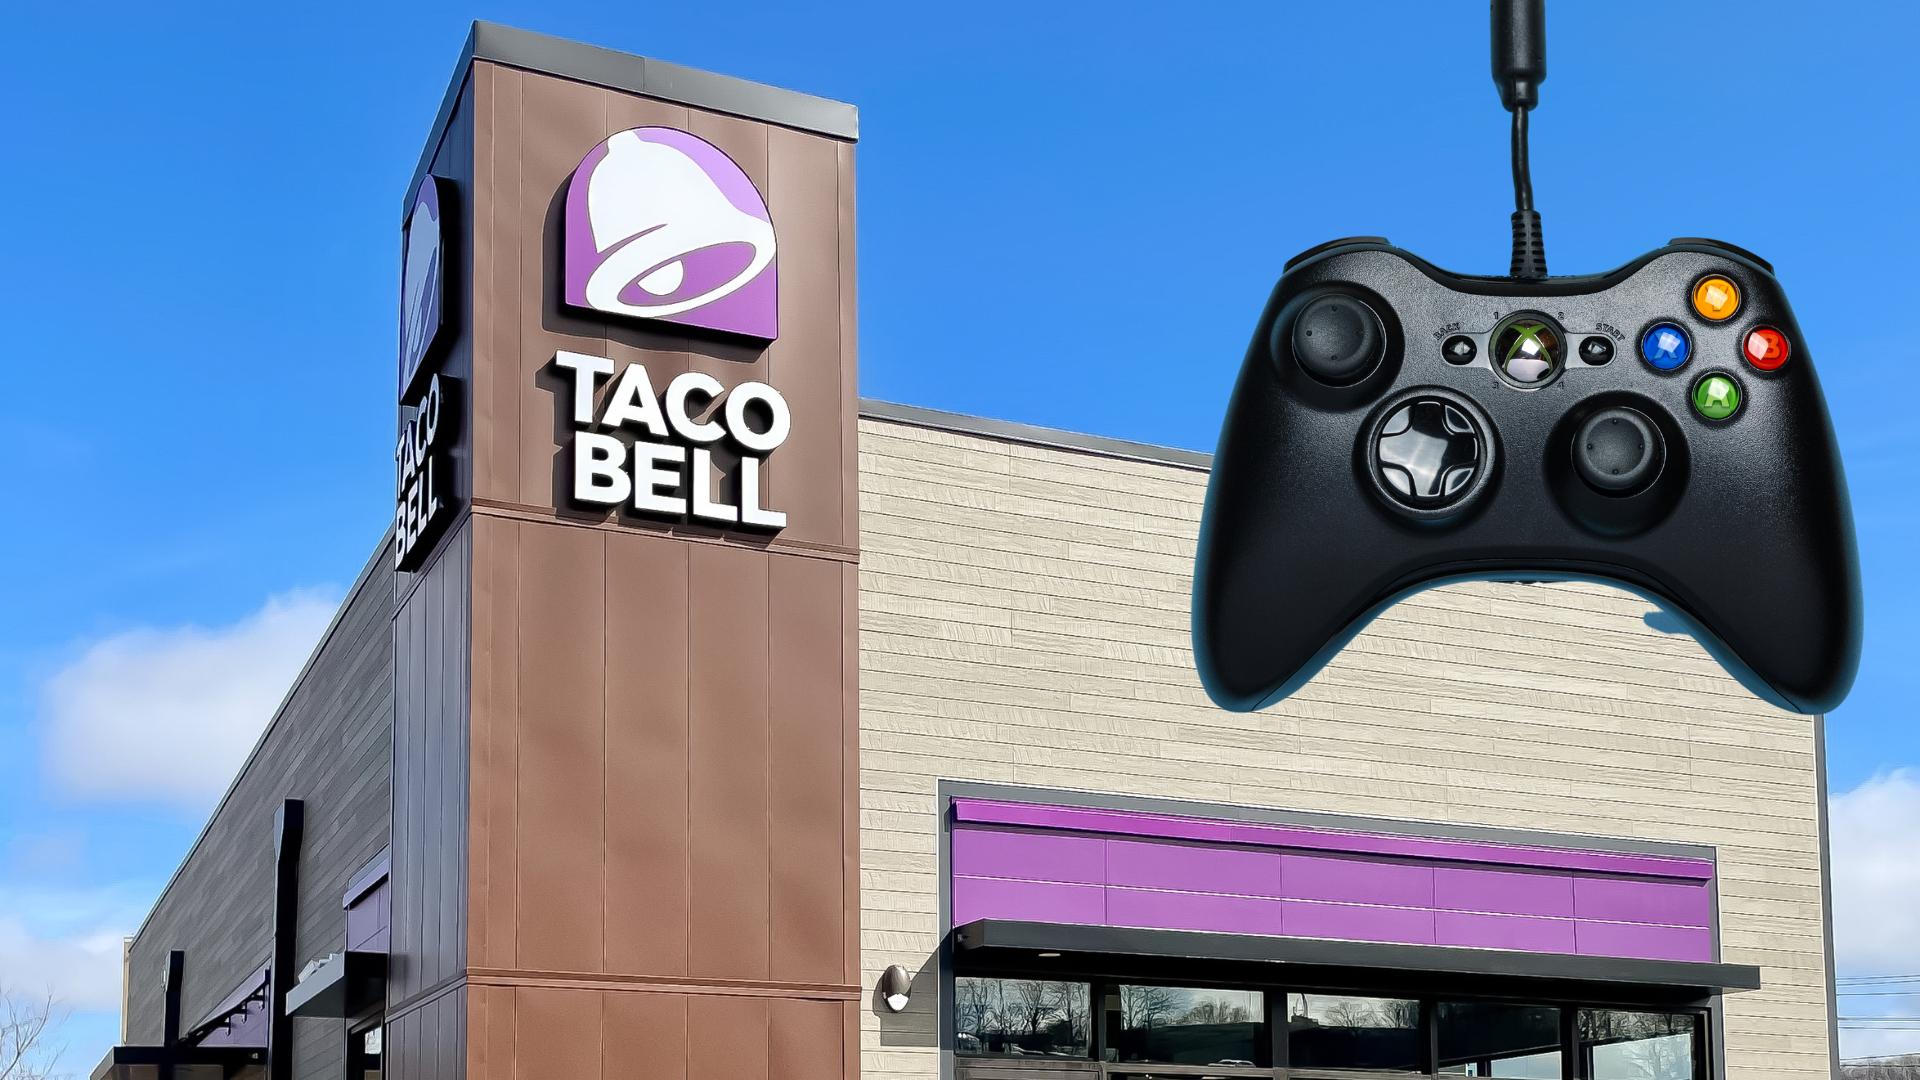 taco bell restaurant and xbox controller to represent collaboration